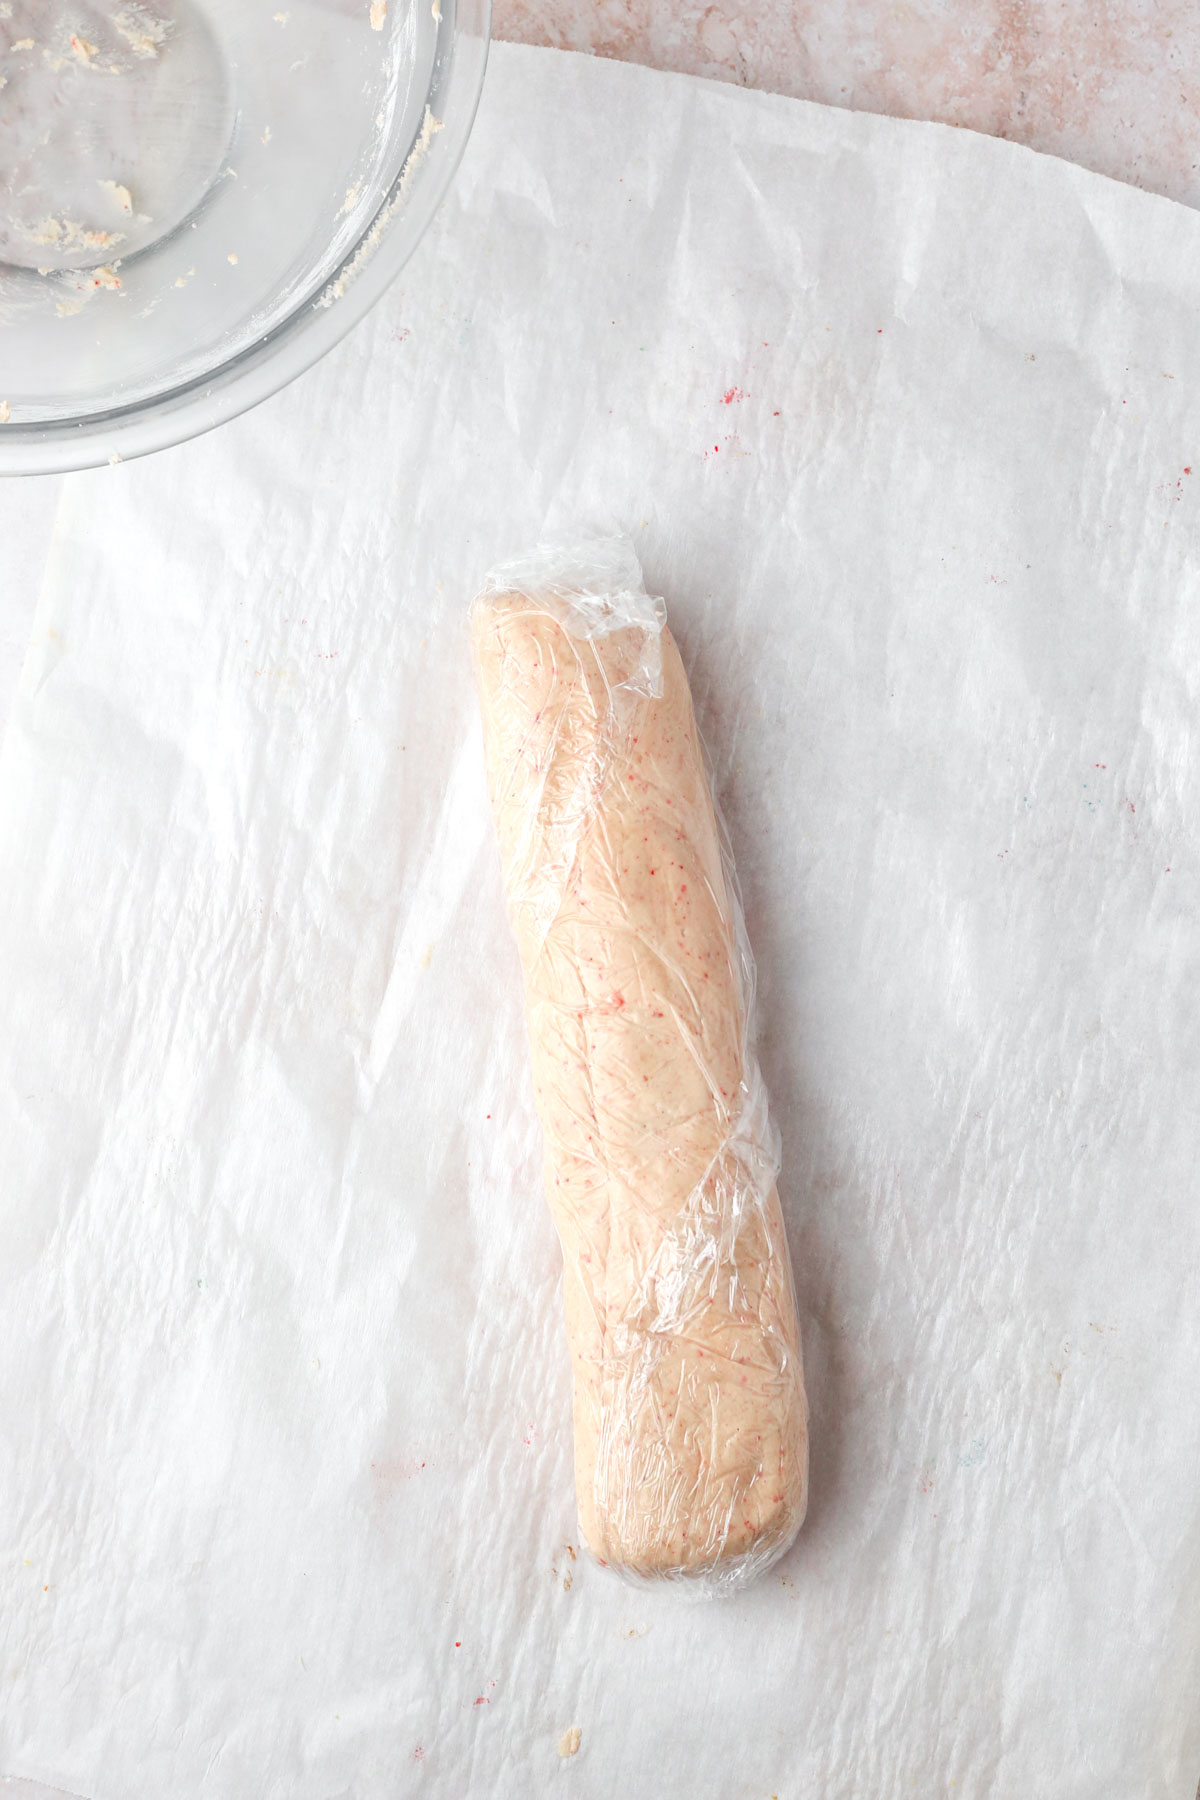 A log of cookie dough wrapped in plastic wrap for chilling in the fridge.